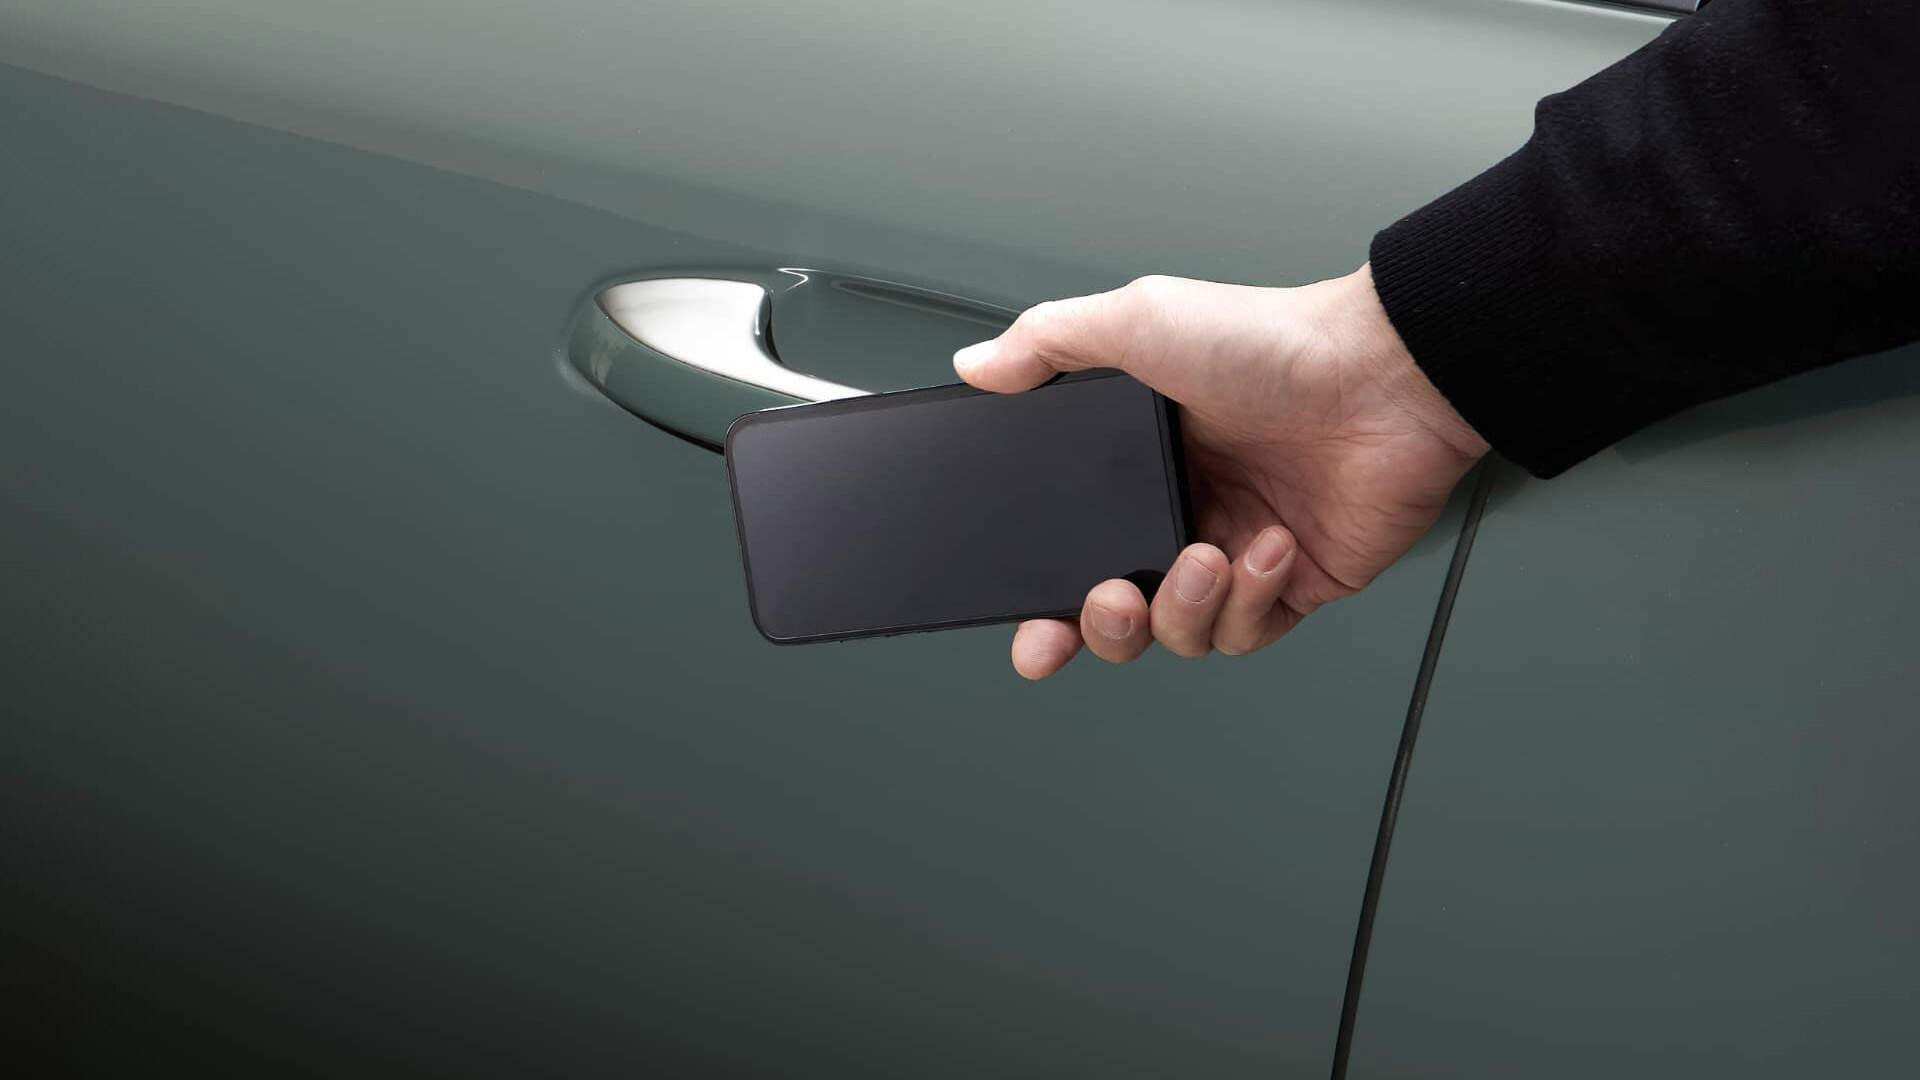 Mobile phone which acts as a key being placed near the handle of a car